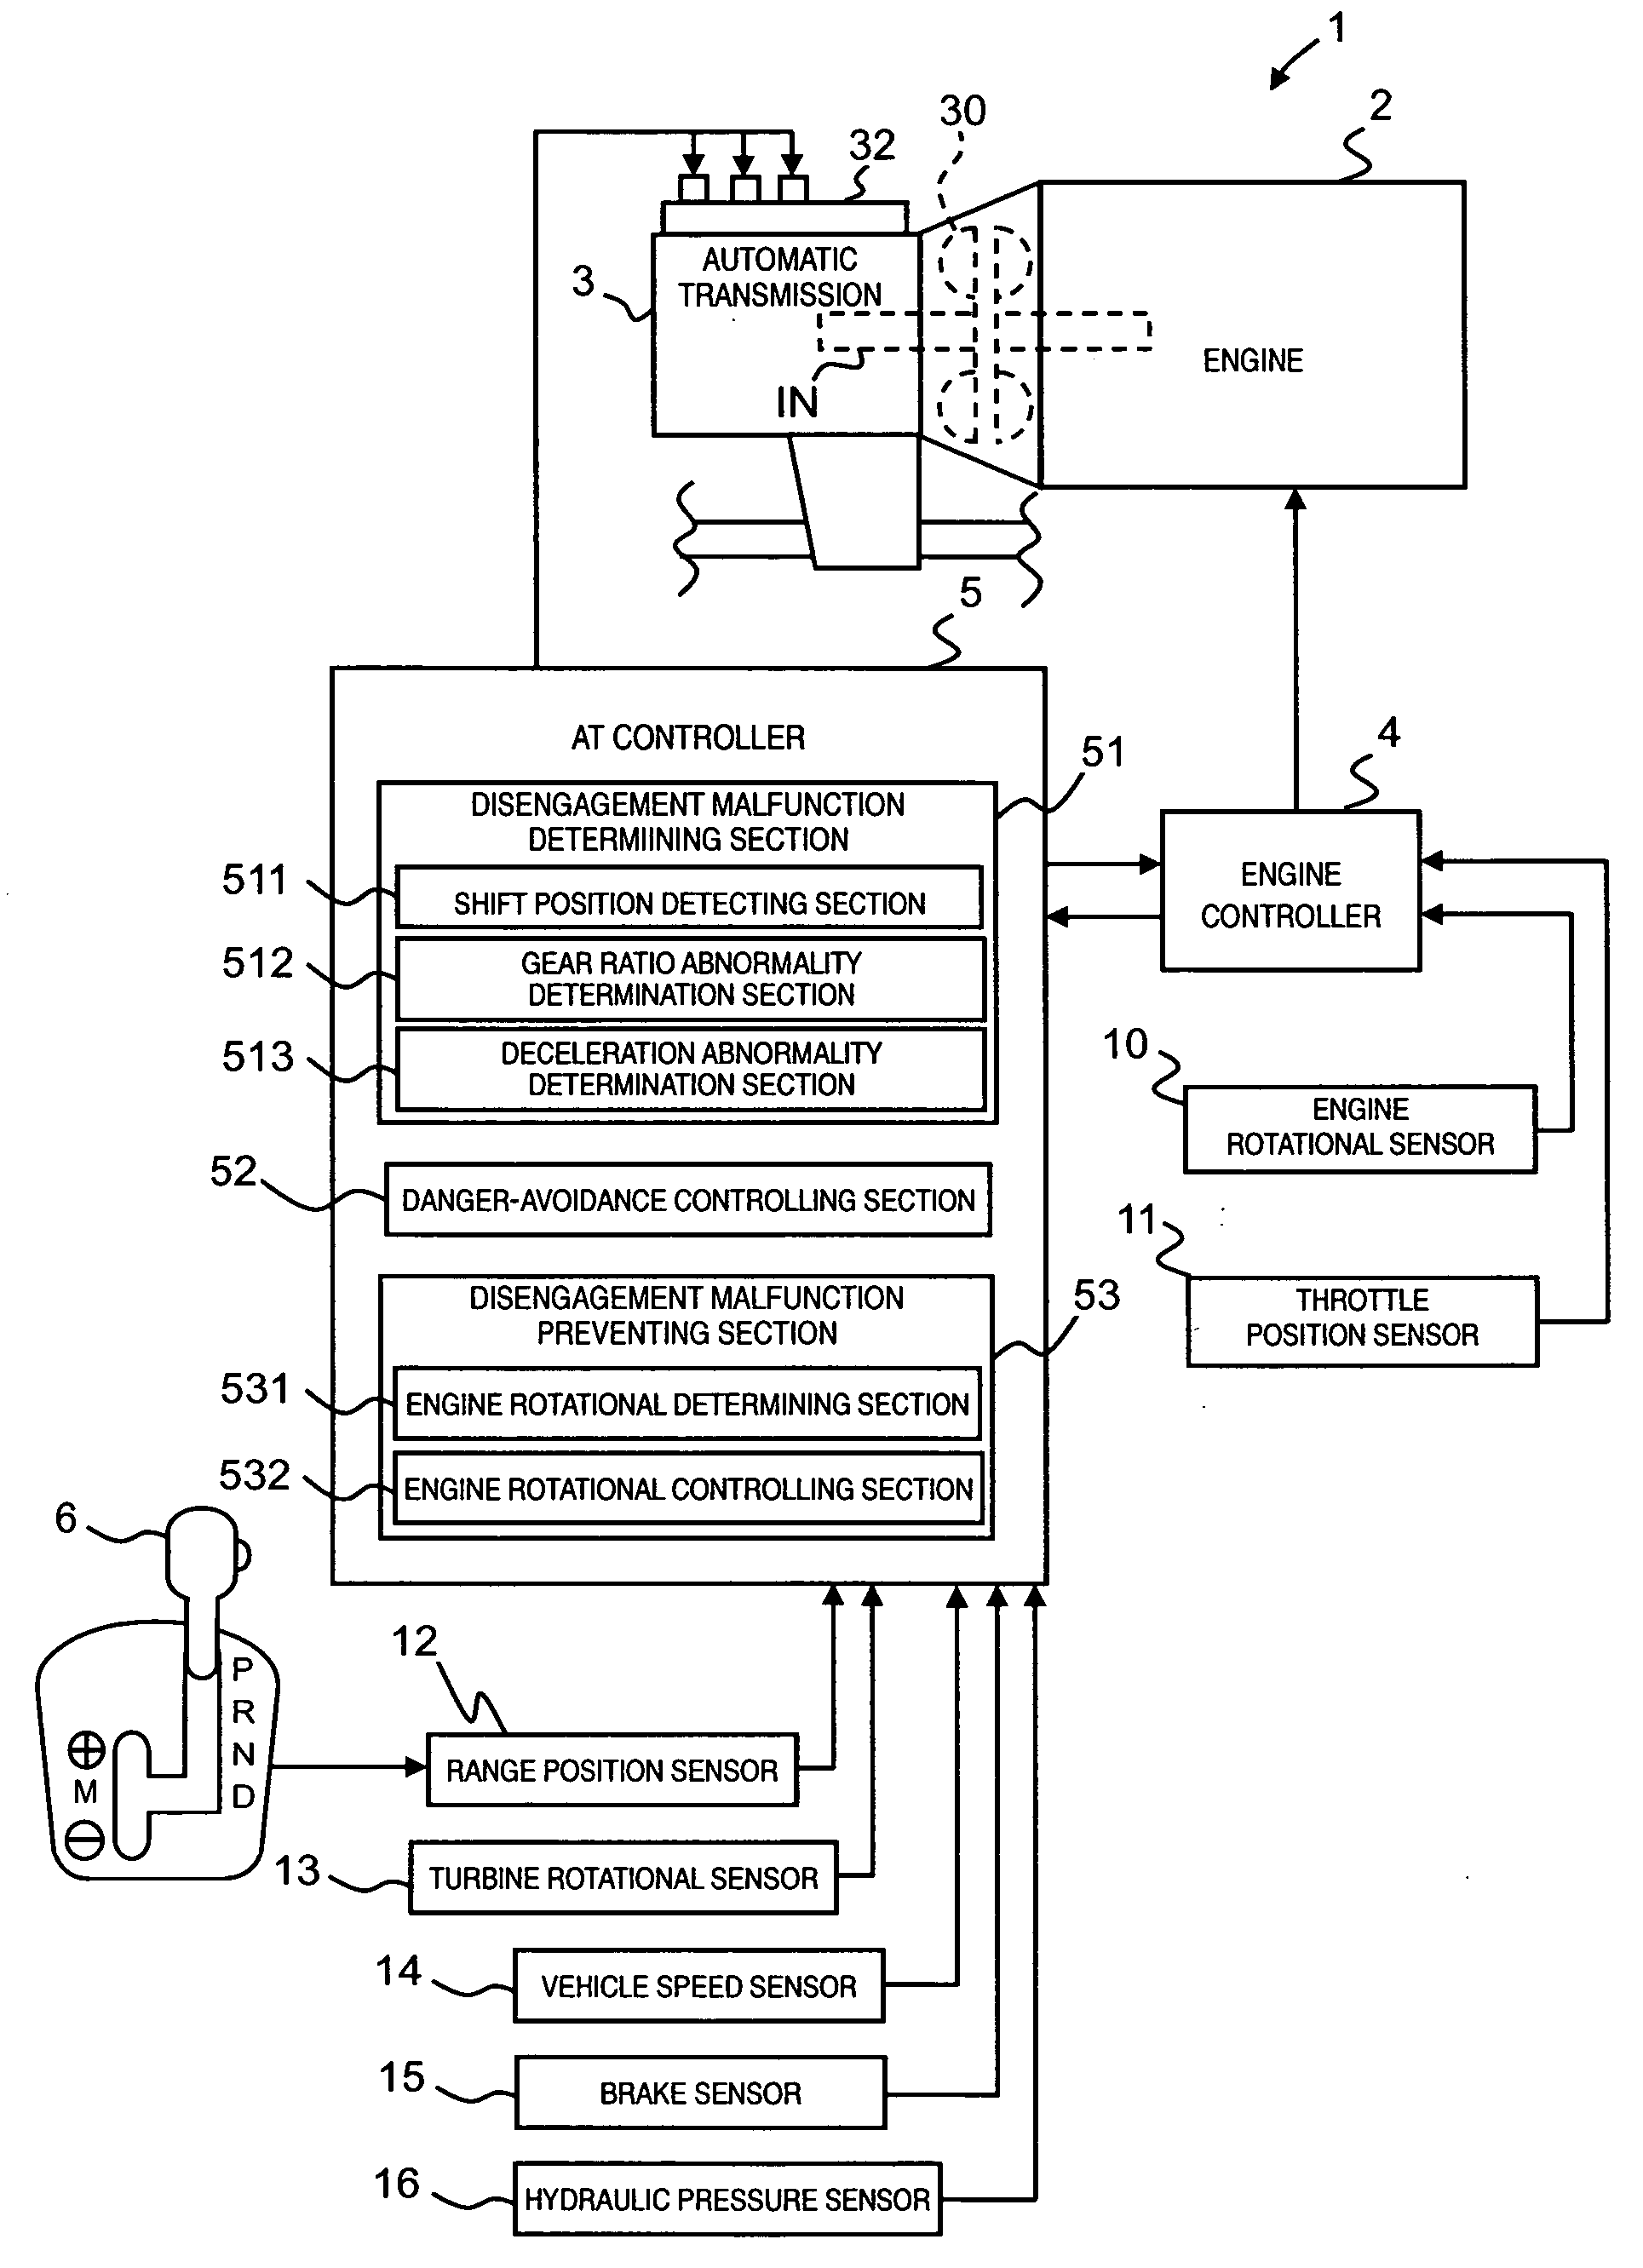 Automatic transmission control system